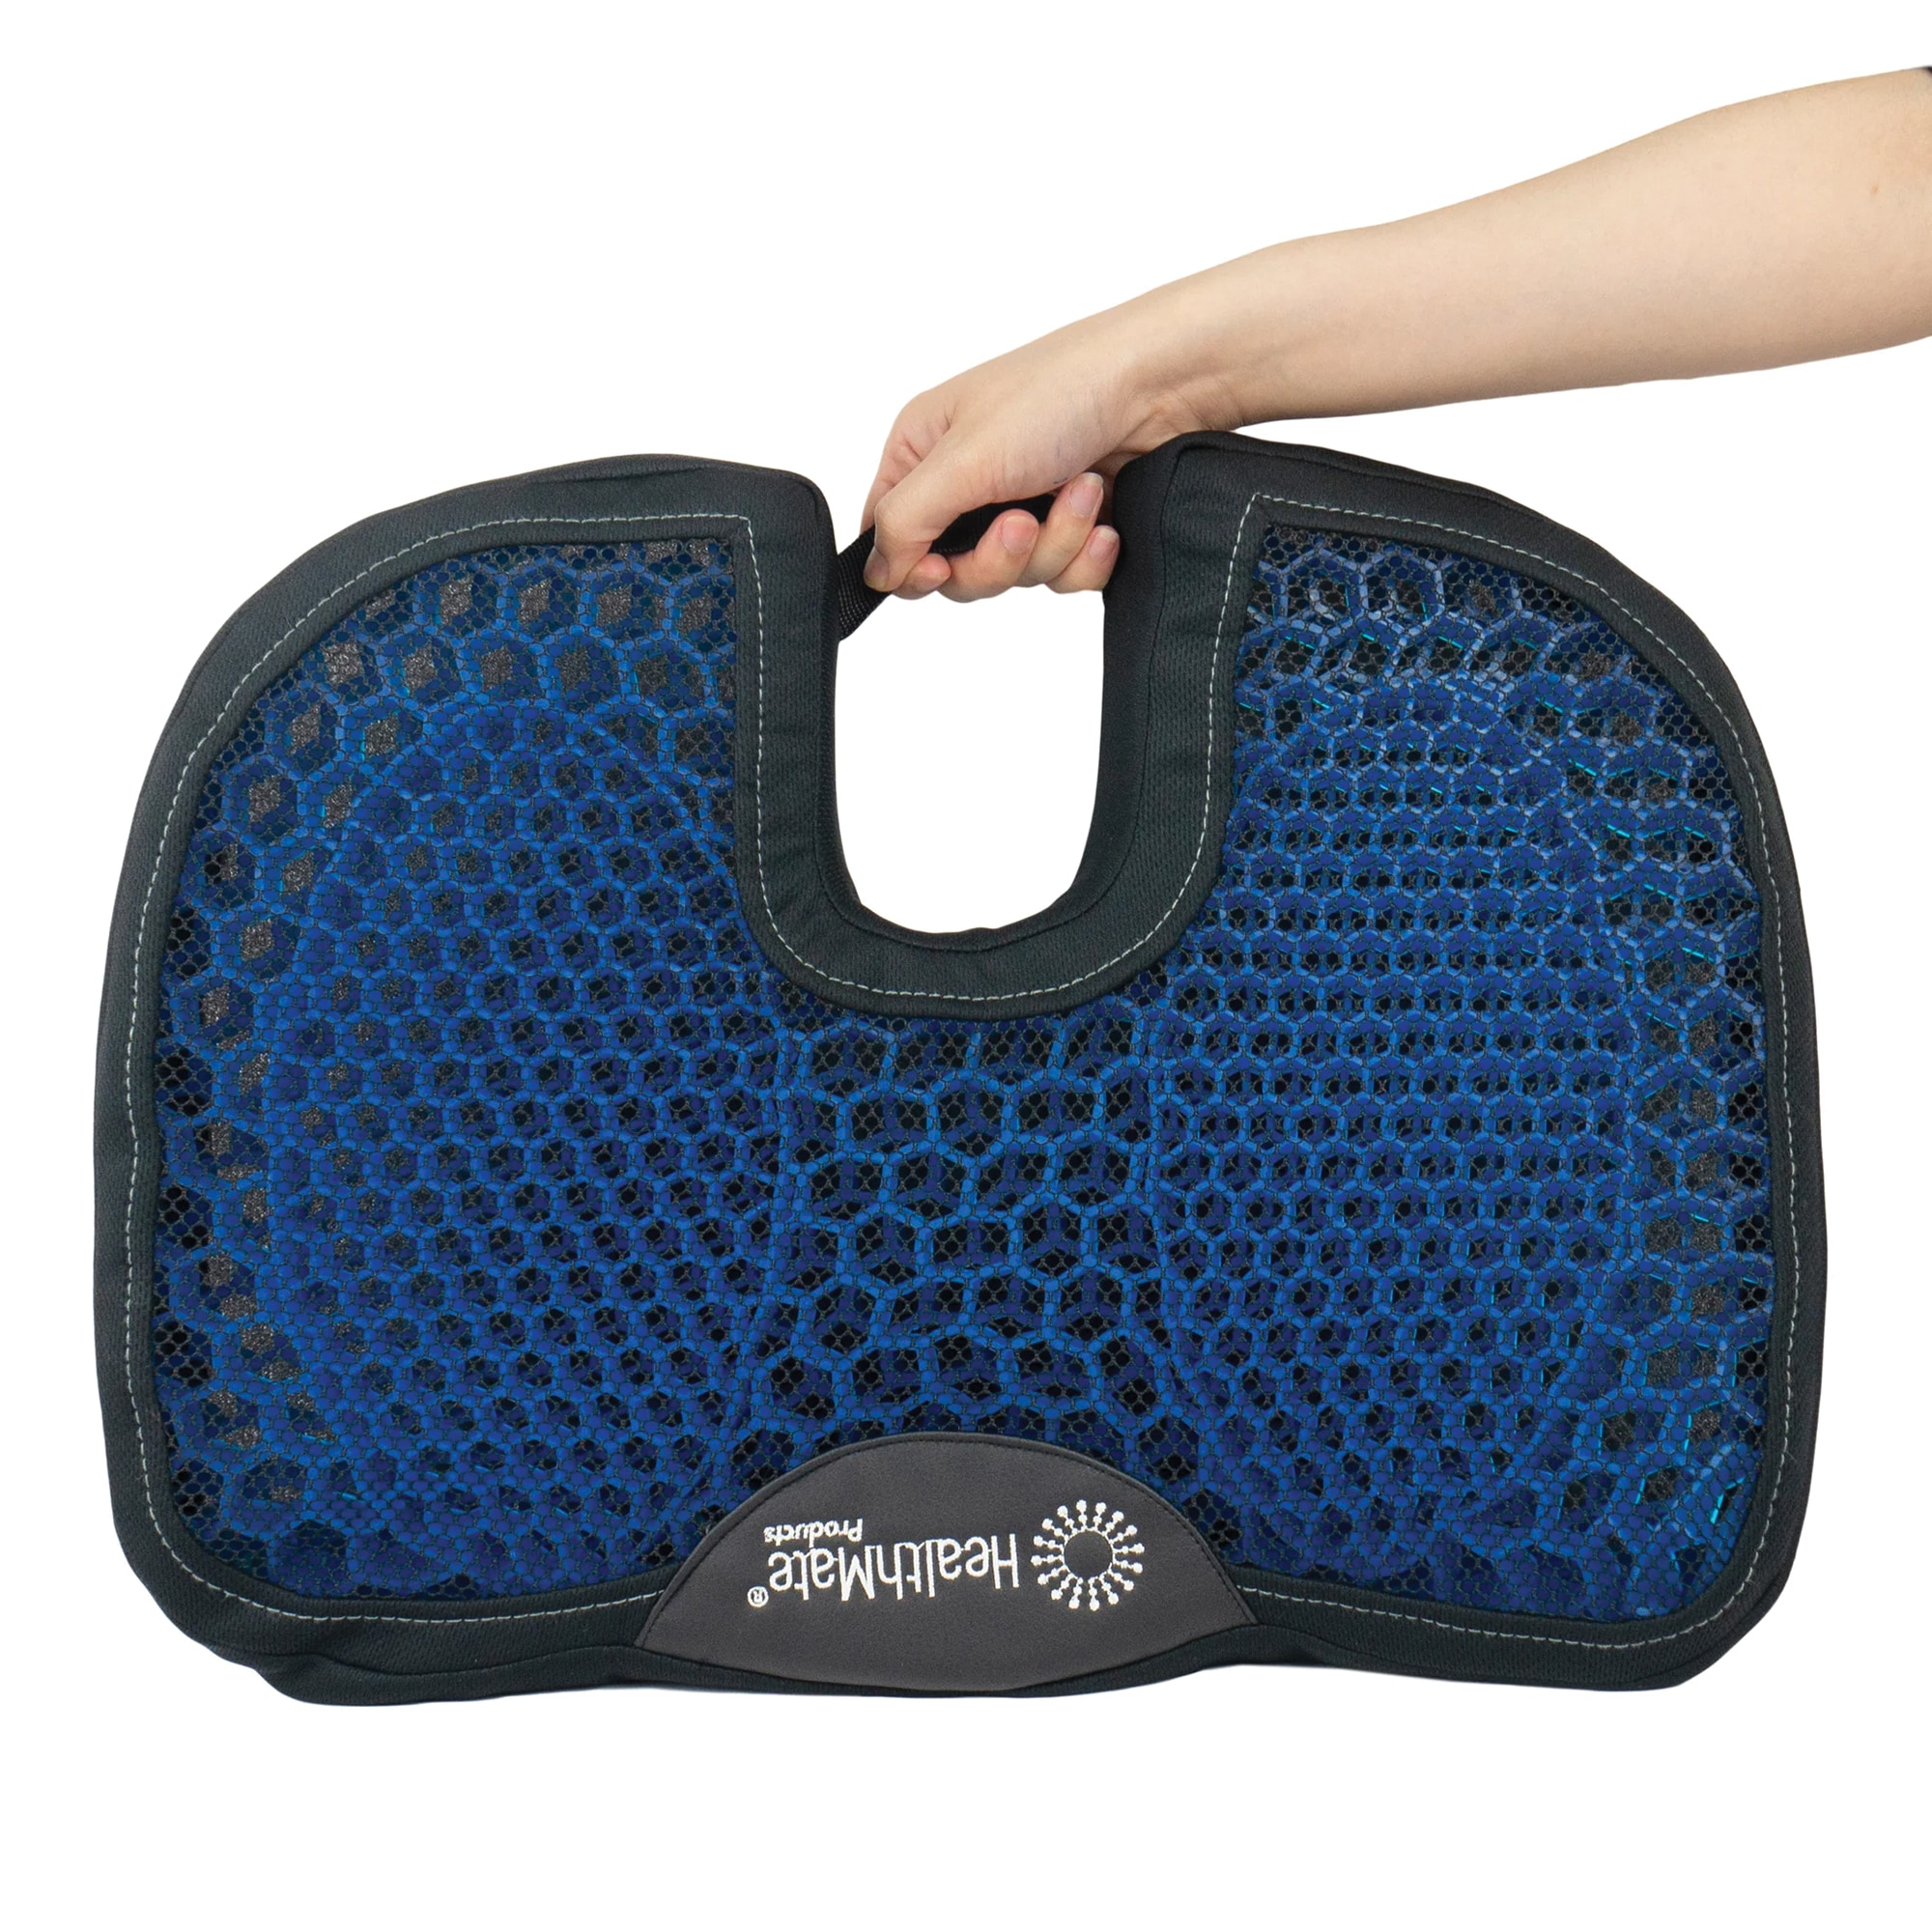 HealthMate Black Polyester Seat Cushion for Car - Provides Coccyx